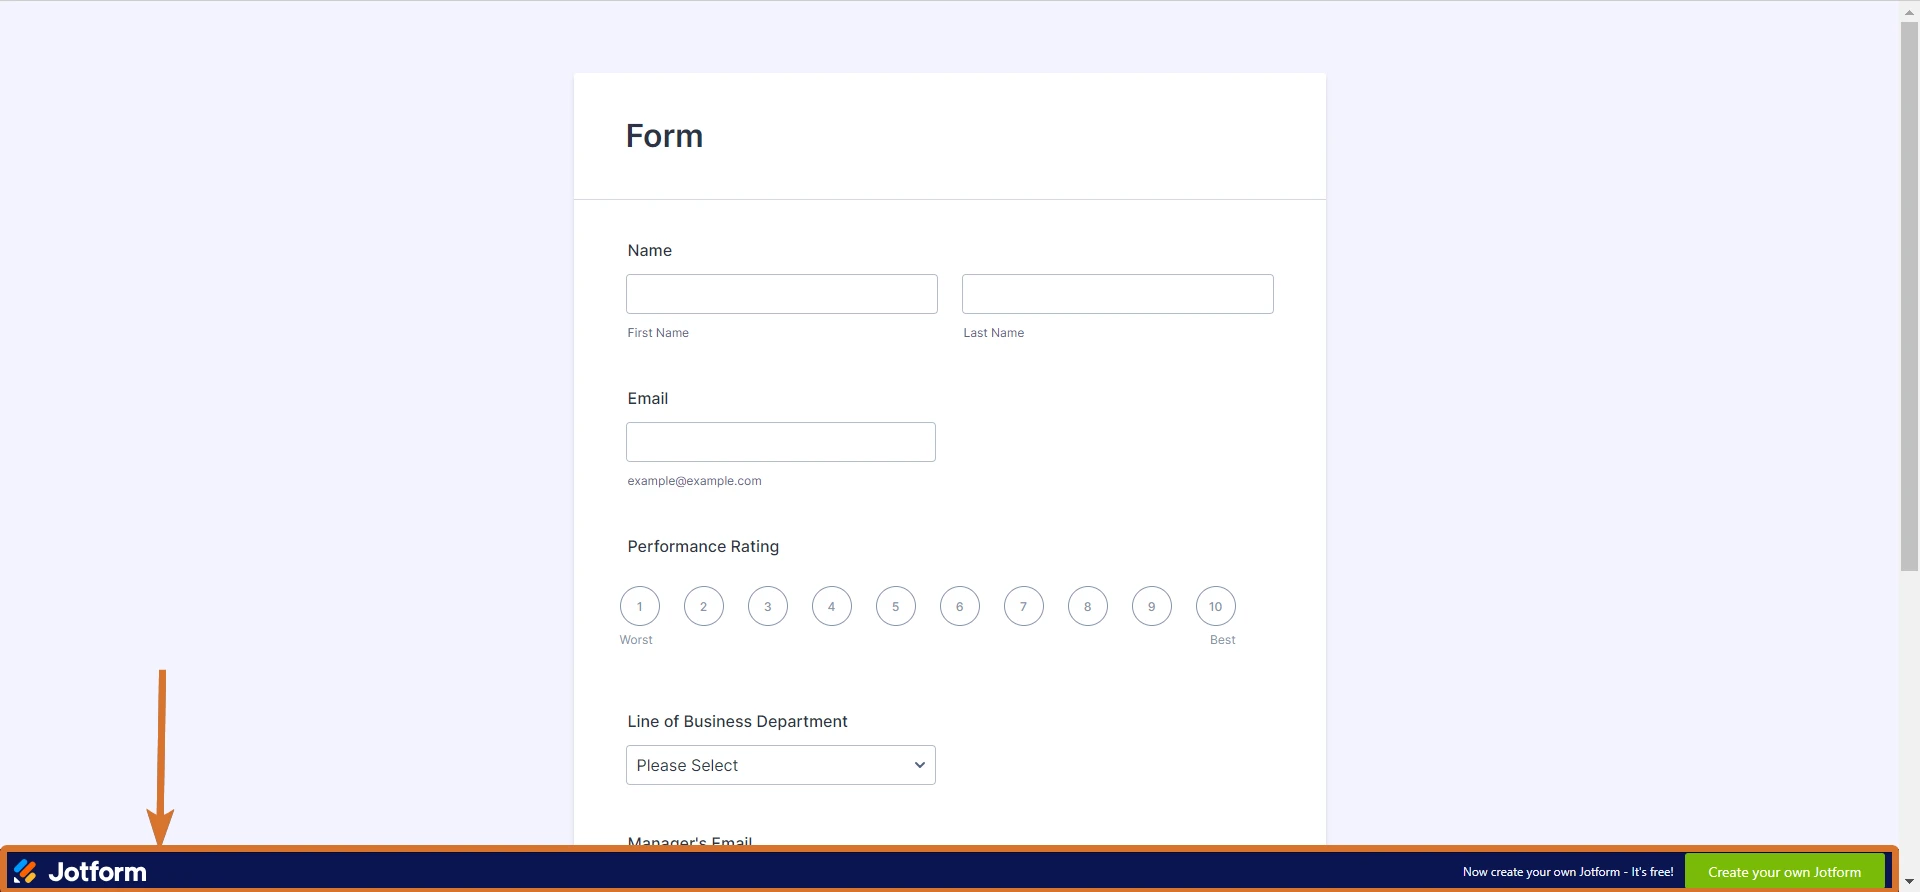 How can I make my own branding on the form? Image 1 Screenshot 50